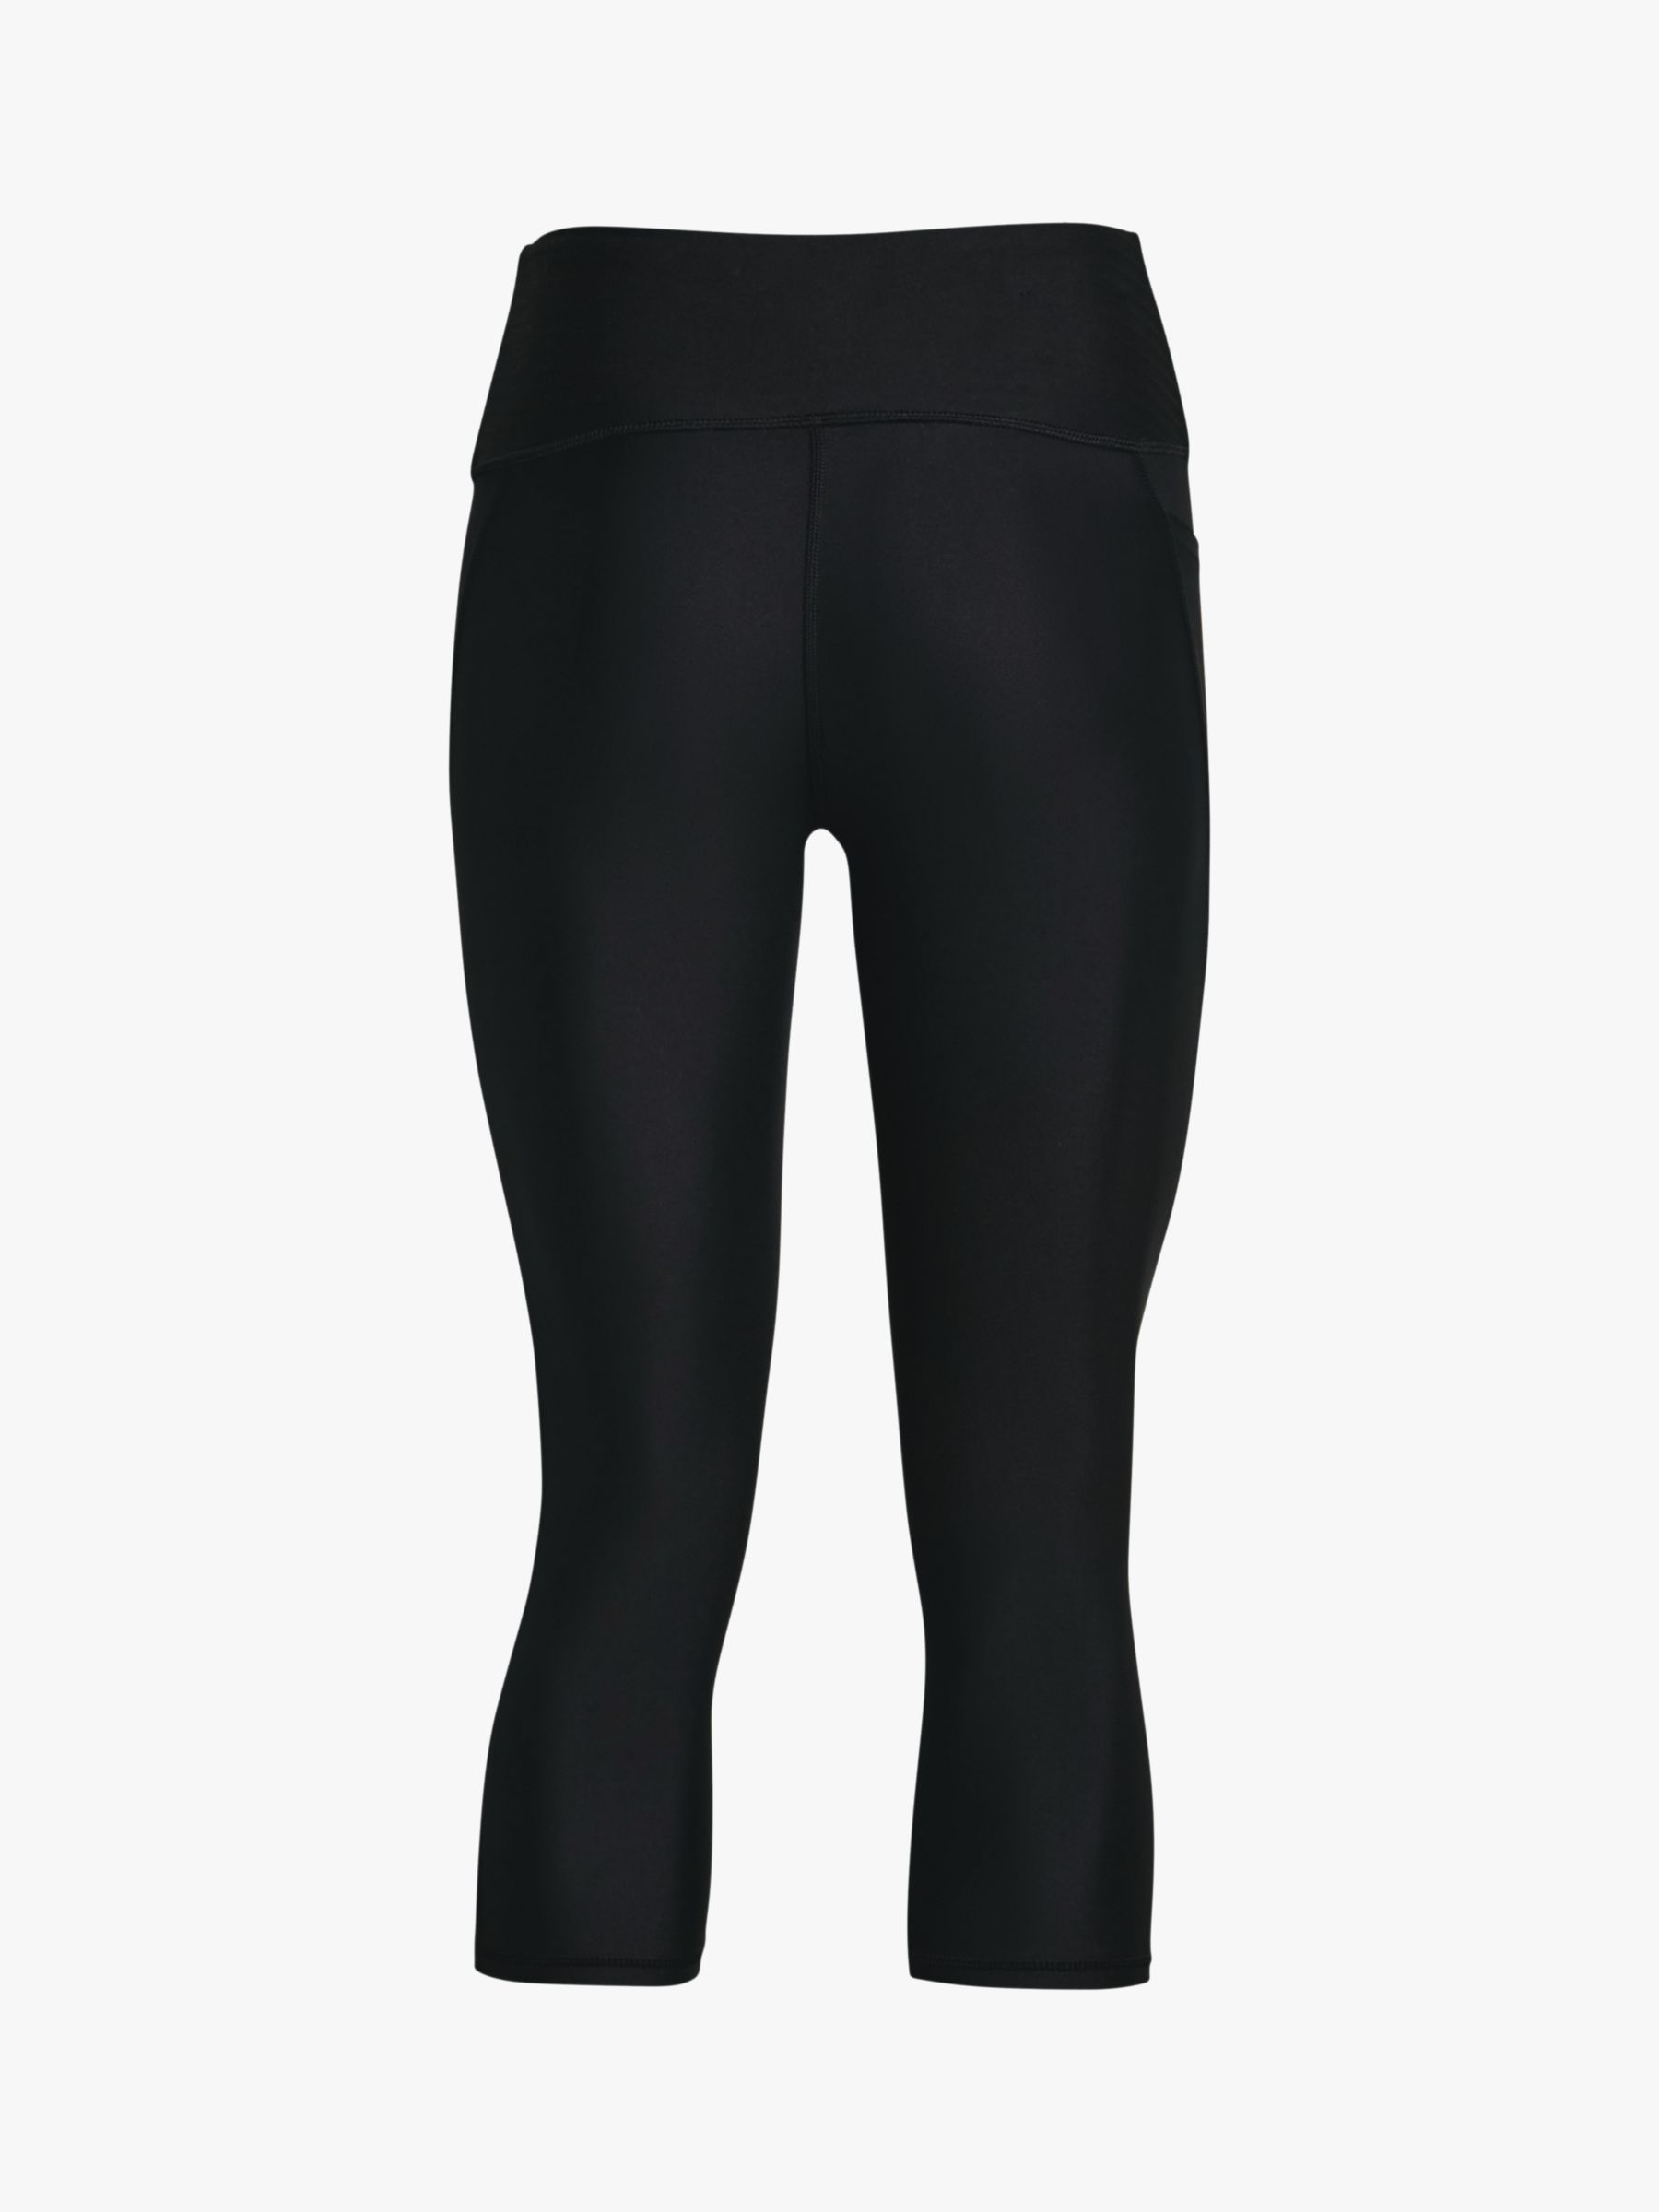 Under Armour Women's HeatGear® Compression High-Rise Cropped